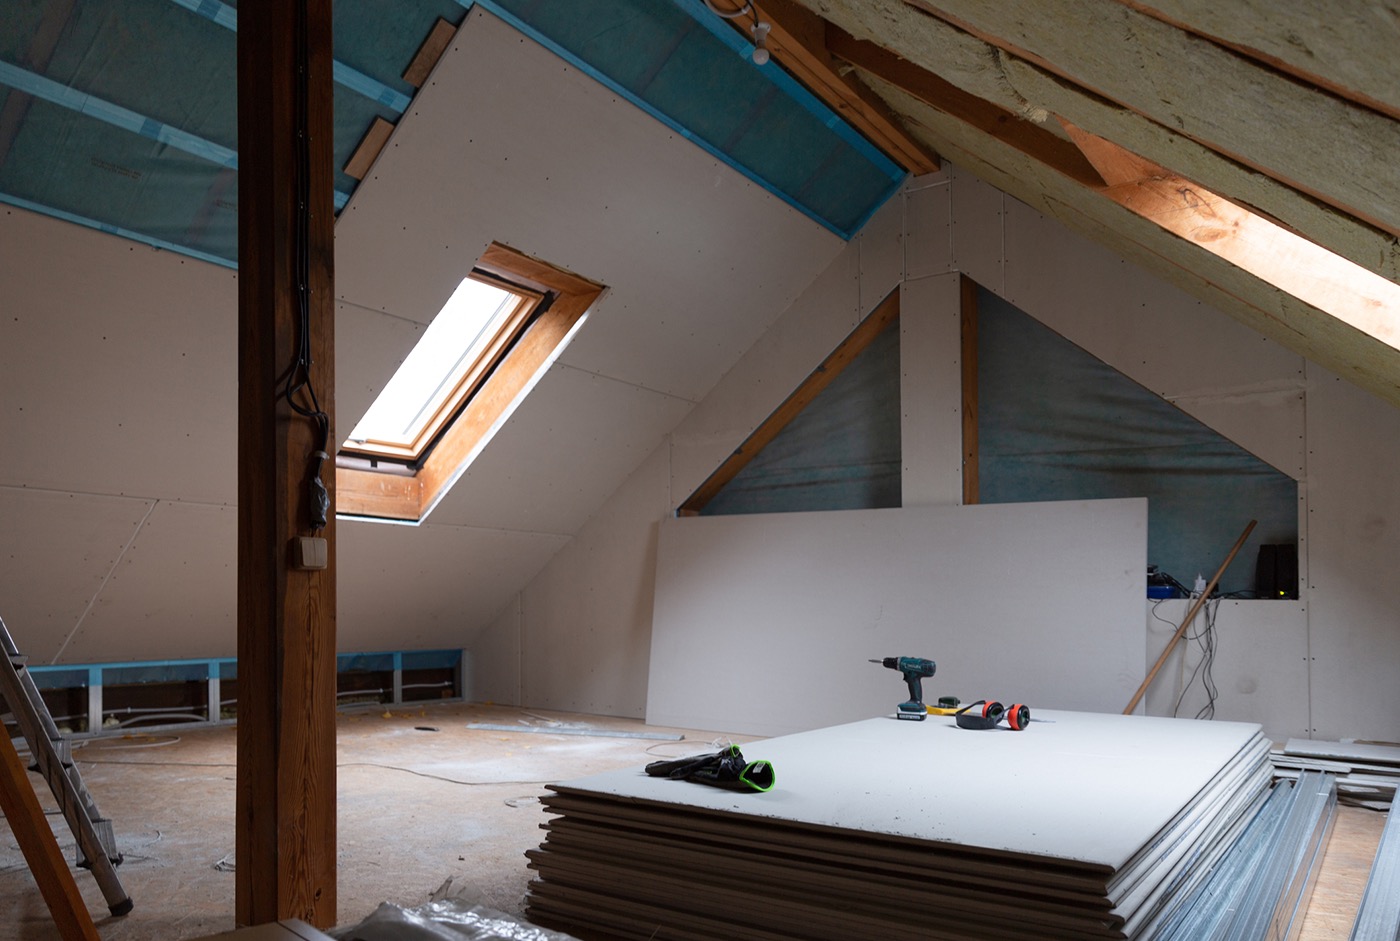 How Much Weight Can Attic Hold